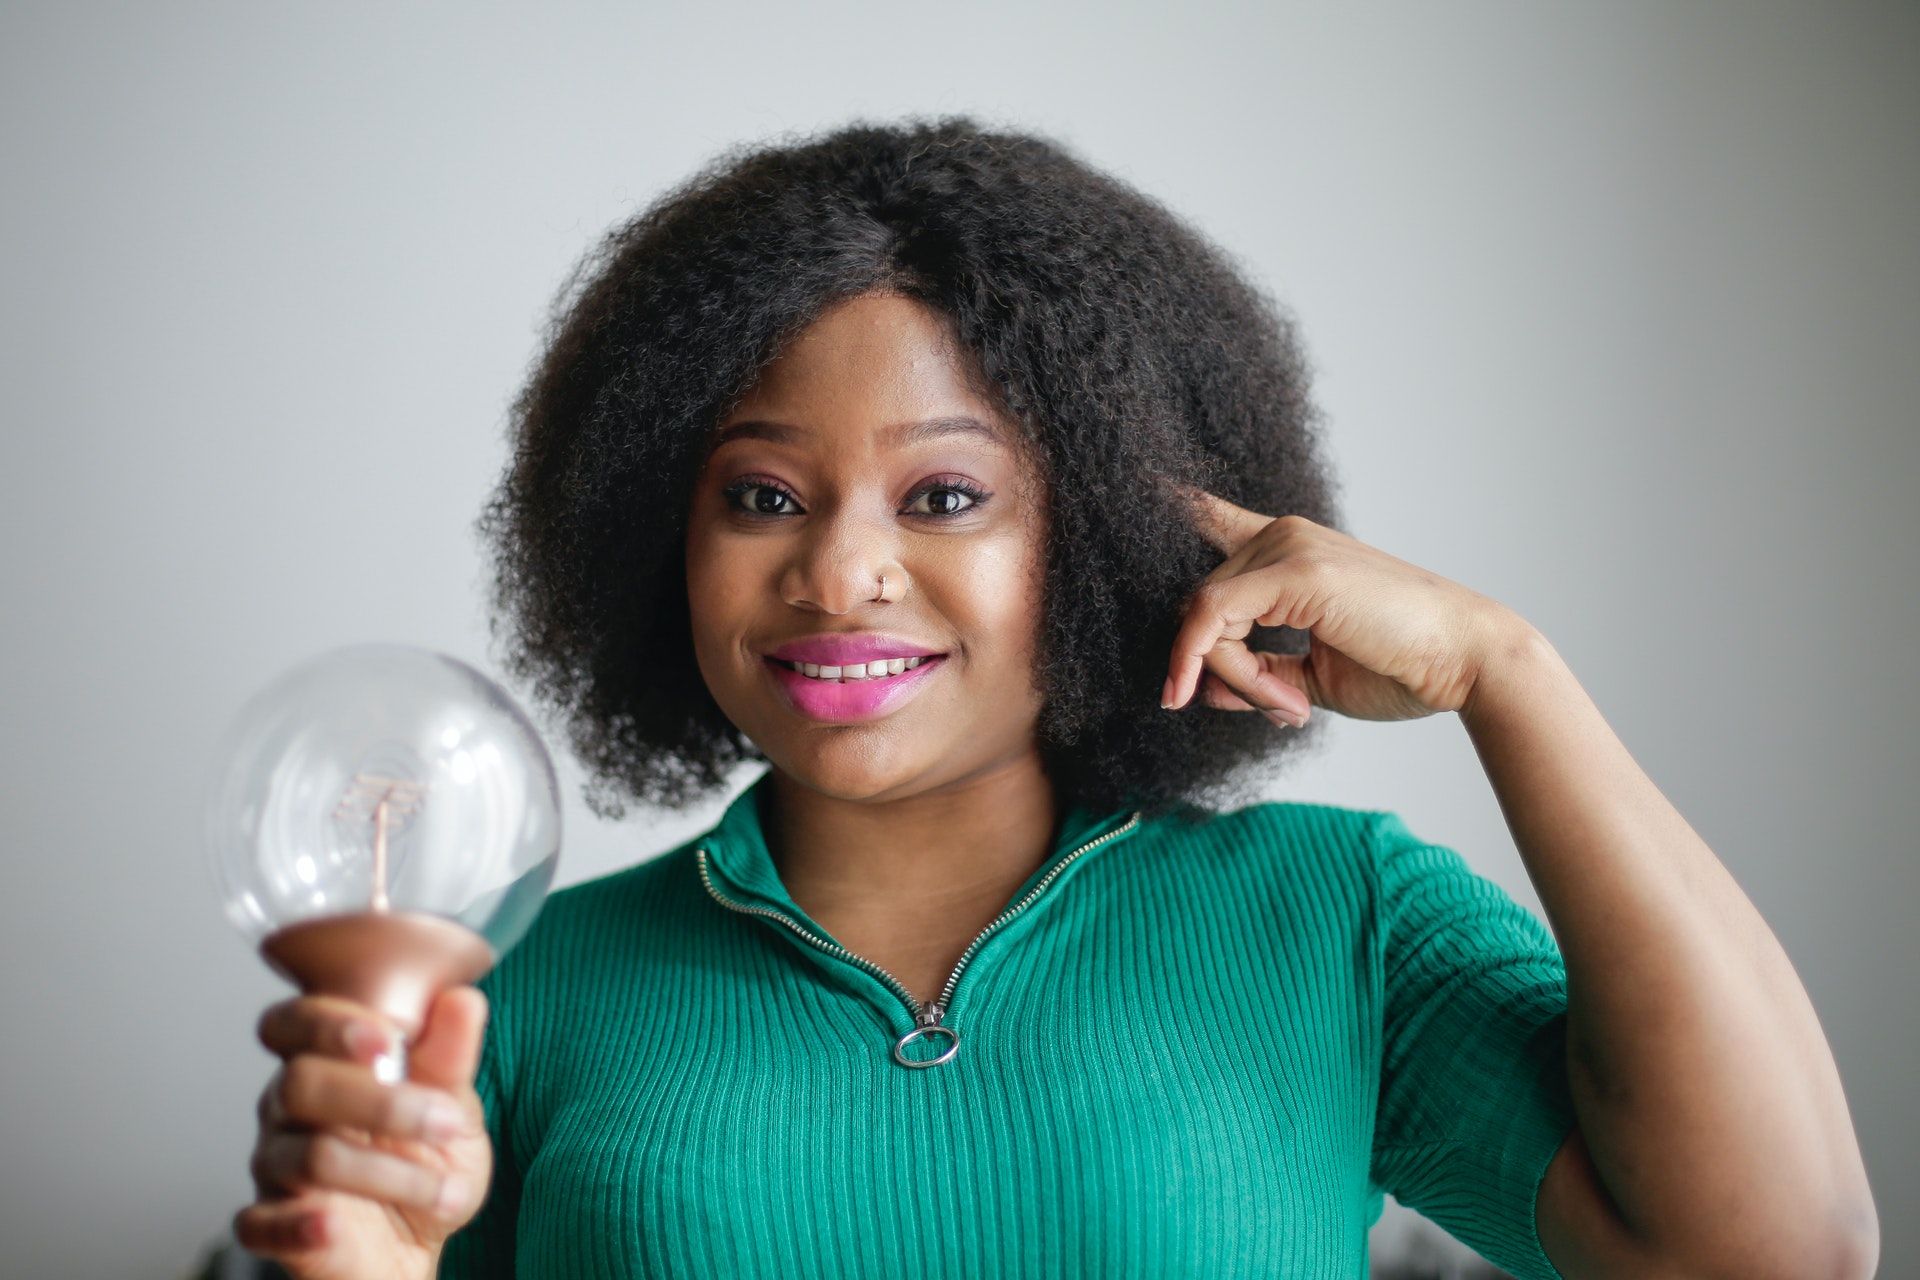 Light bulb moment; Select all that apply NCLEX questions